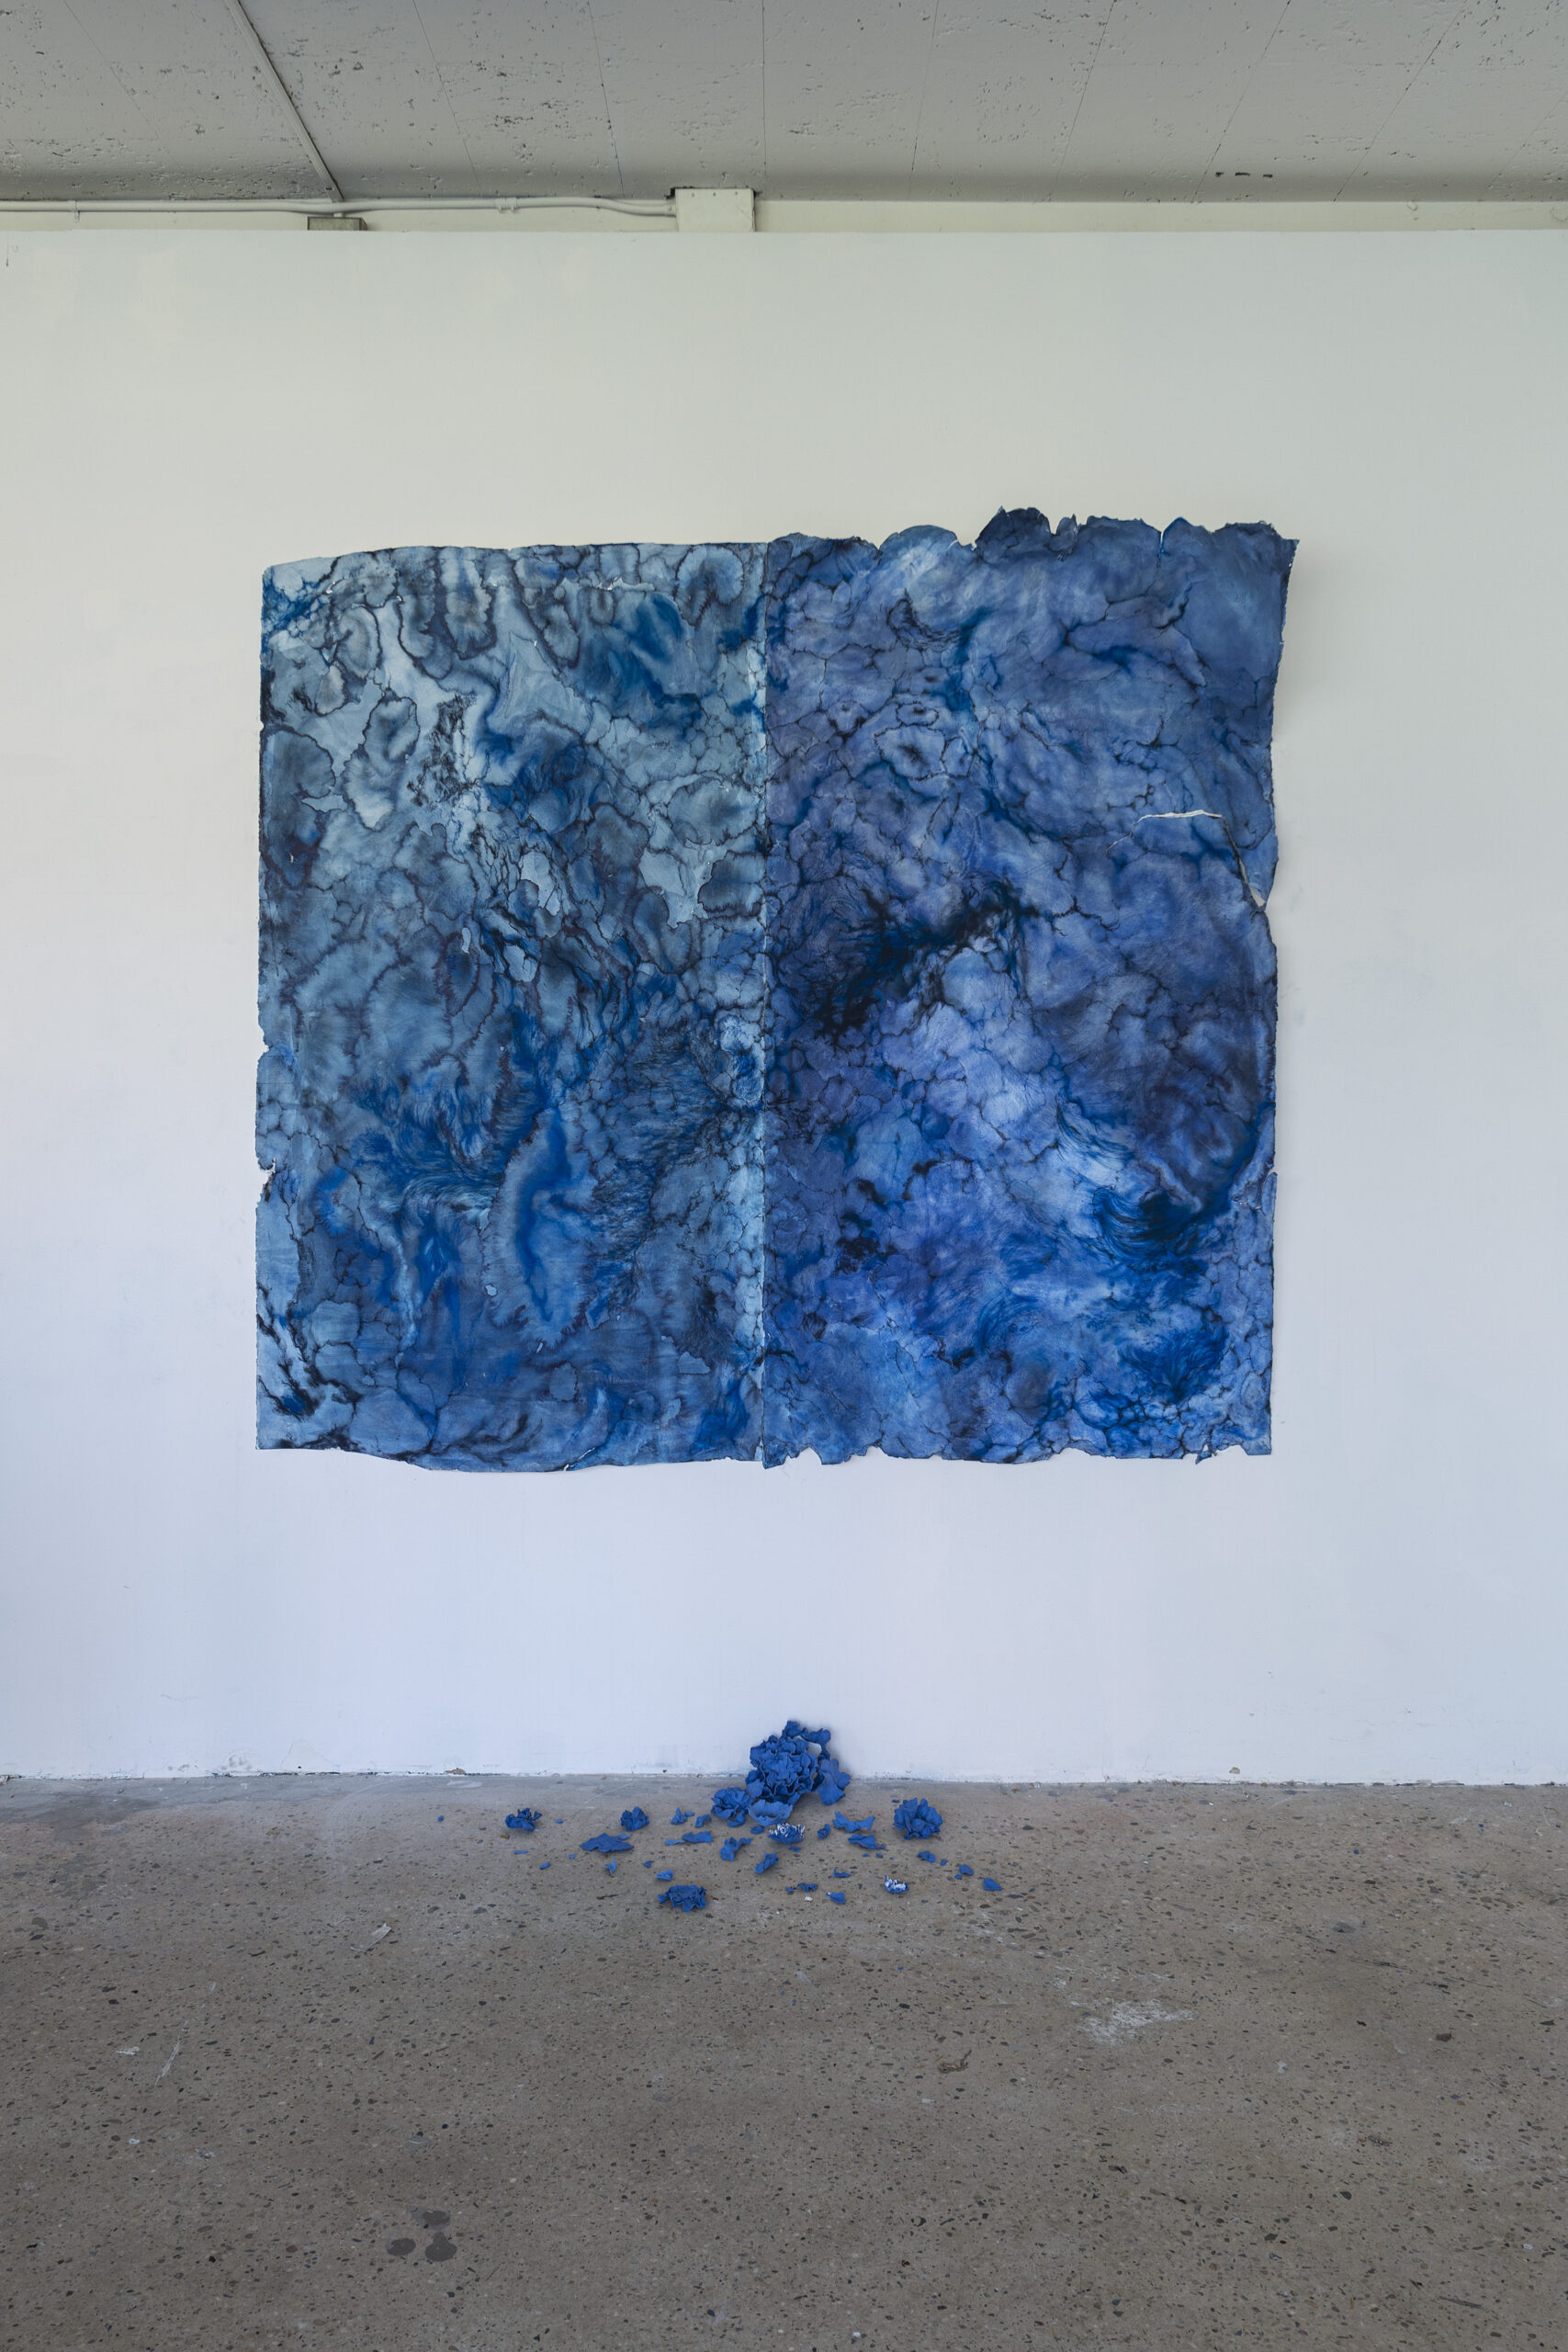 image of a drawing, in a gallery room, with blue fabric pieces scattered on the floor